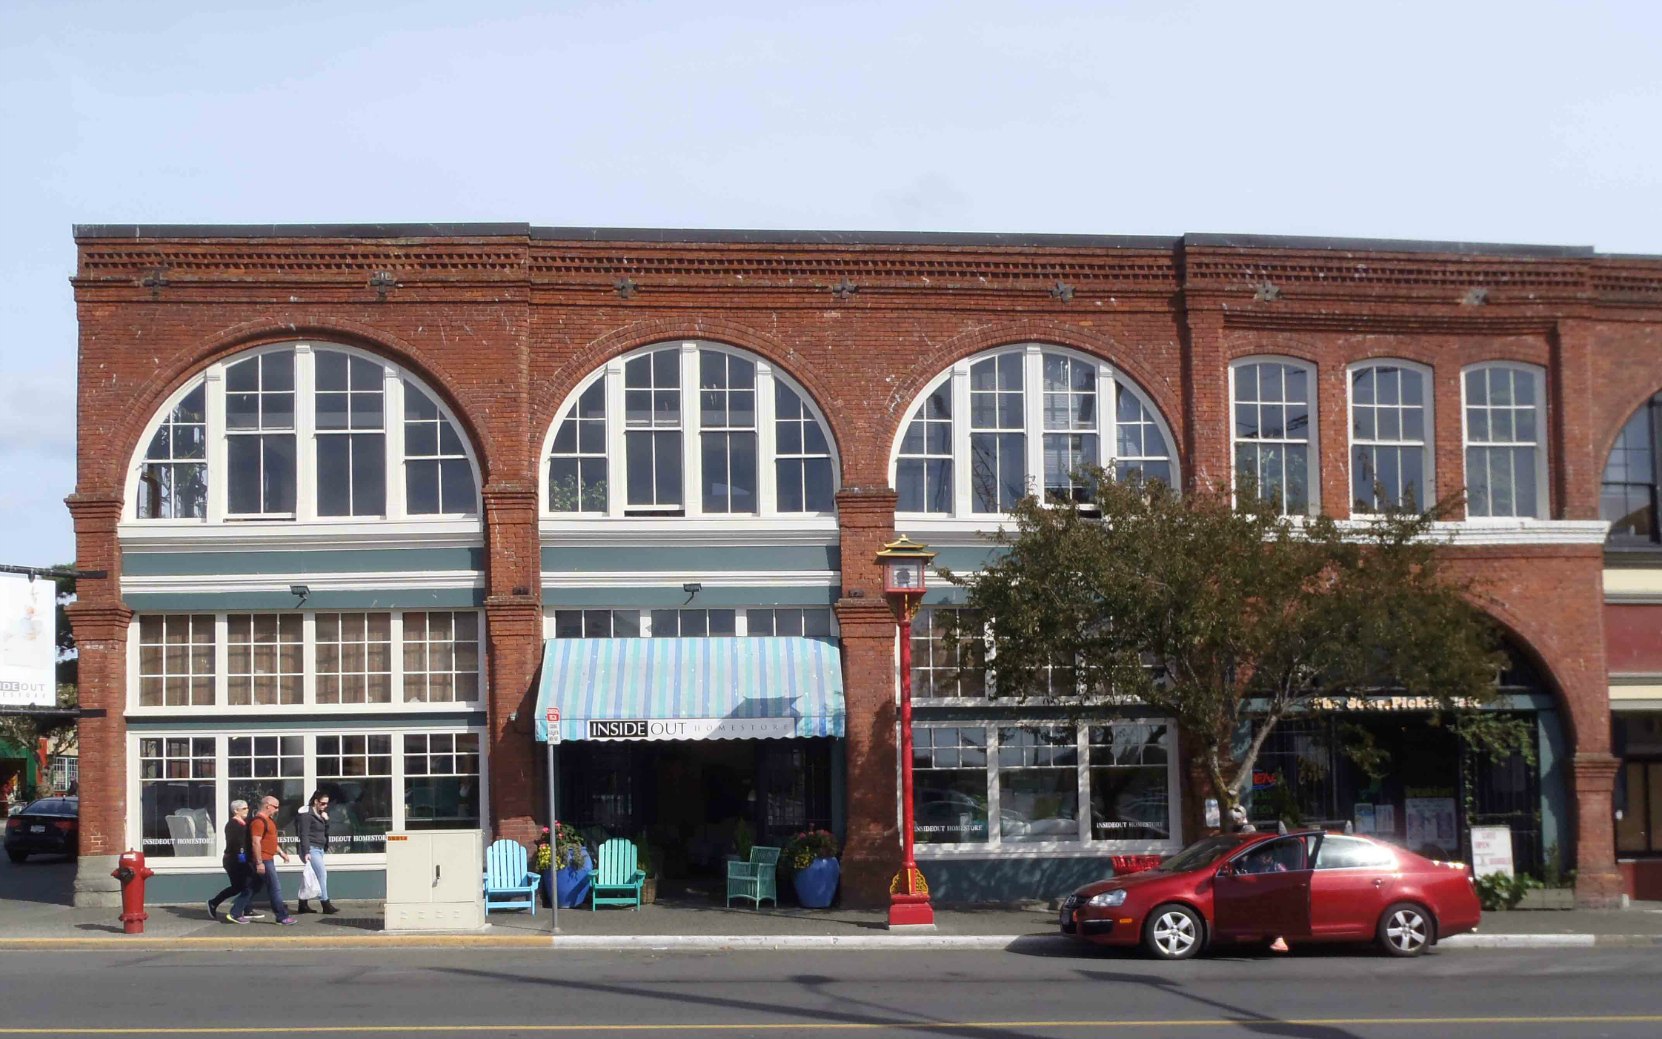 1617-623 Store Street, built in 1898 by architect Thomas Hooper